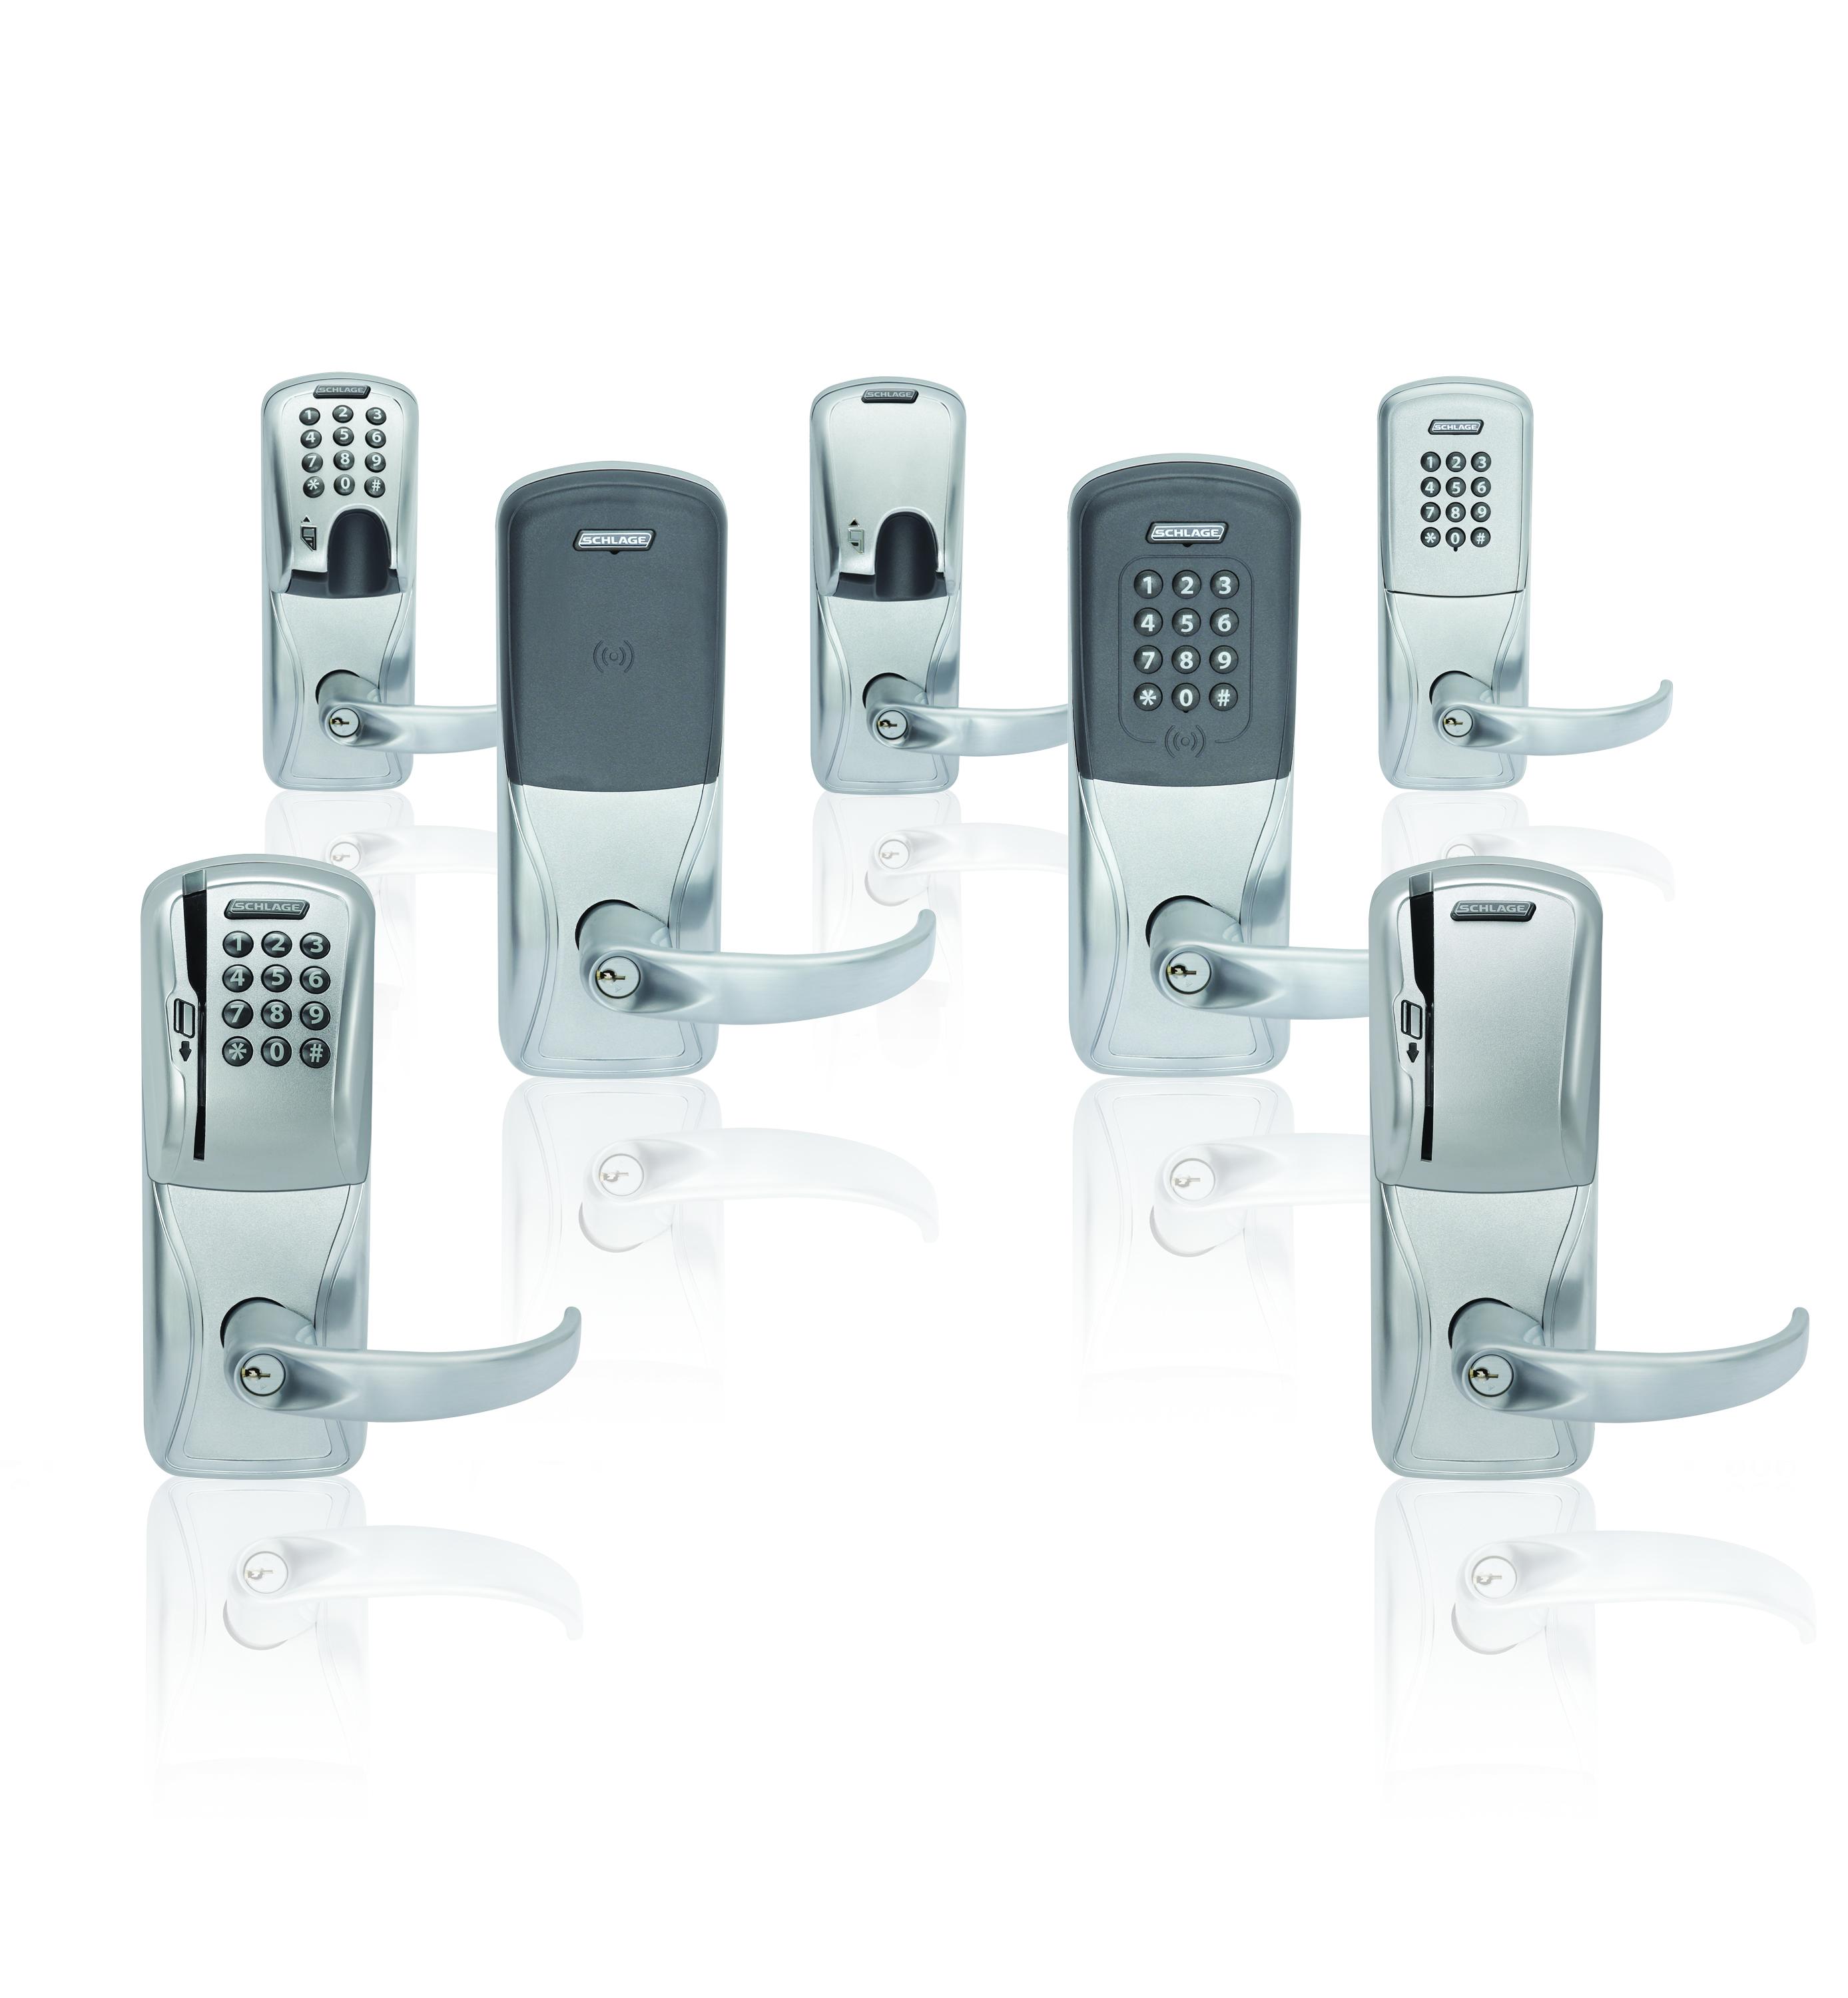 Schlage family of locks AD 300 and AD 400 series